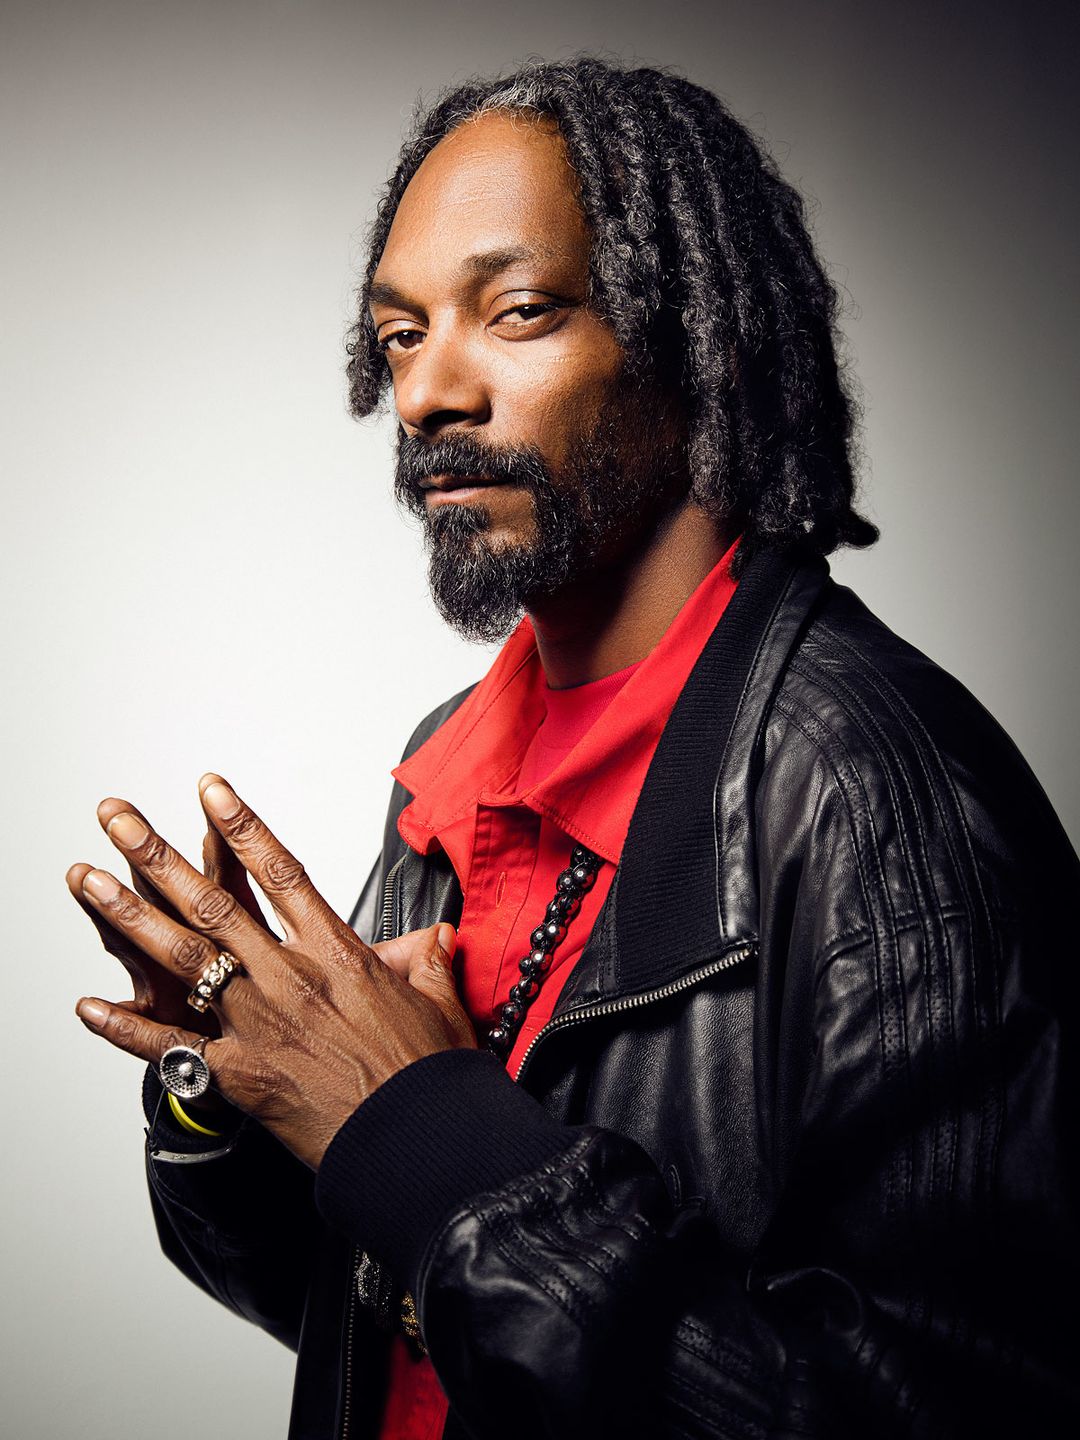 Snoop Dogg who is his mother